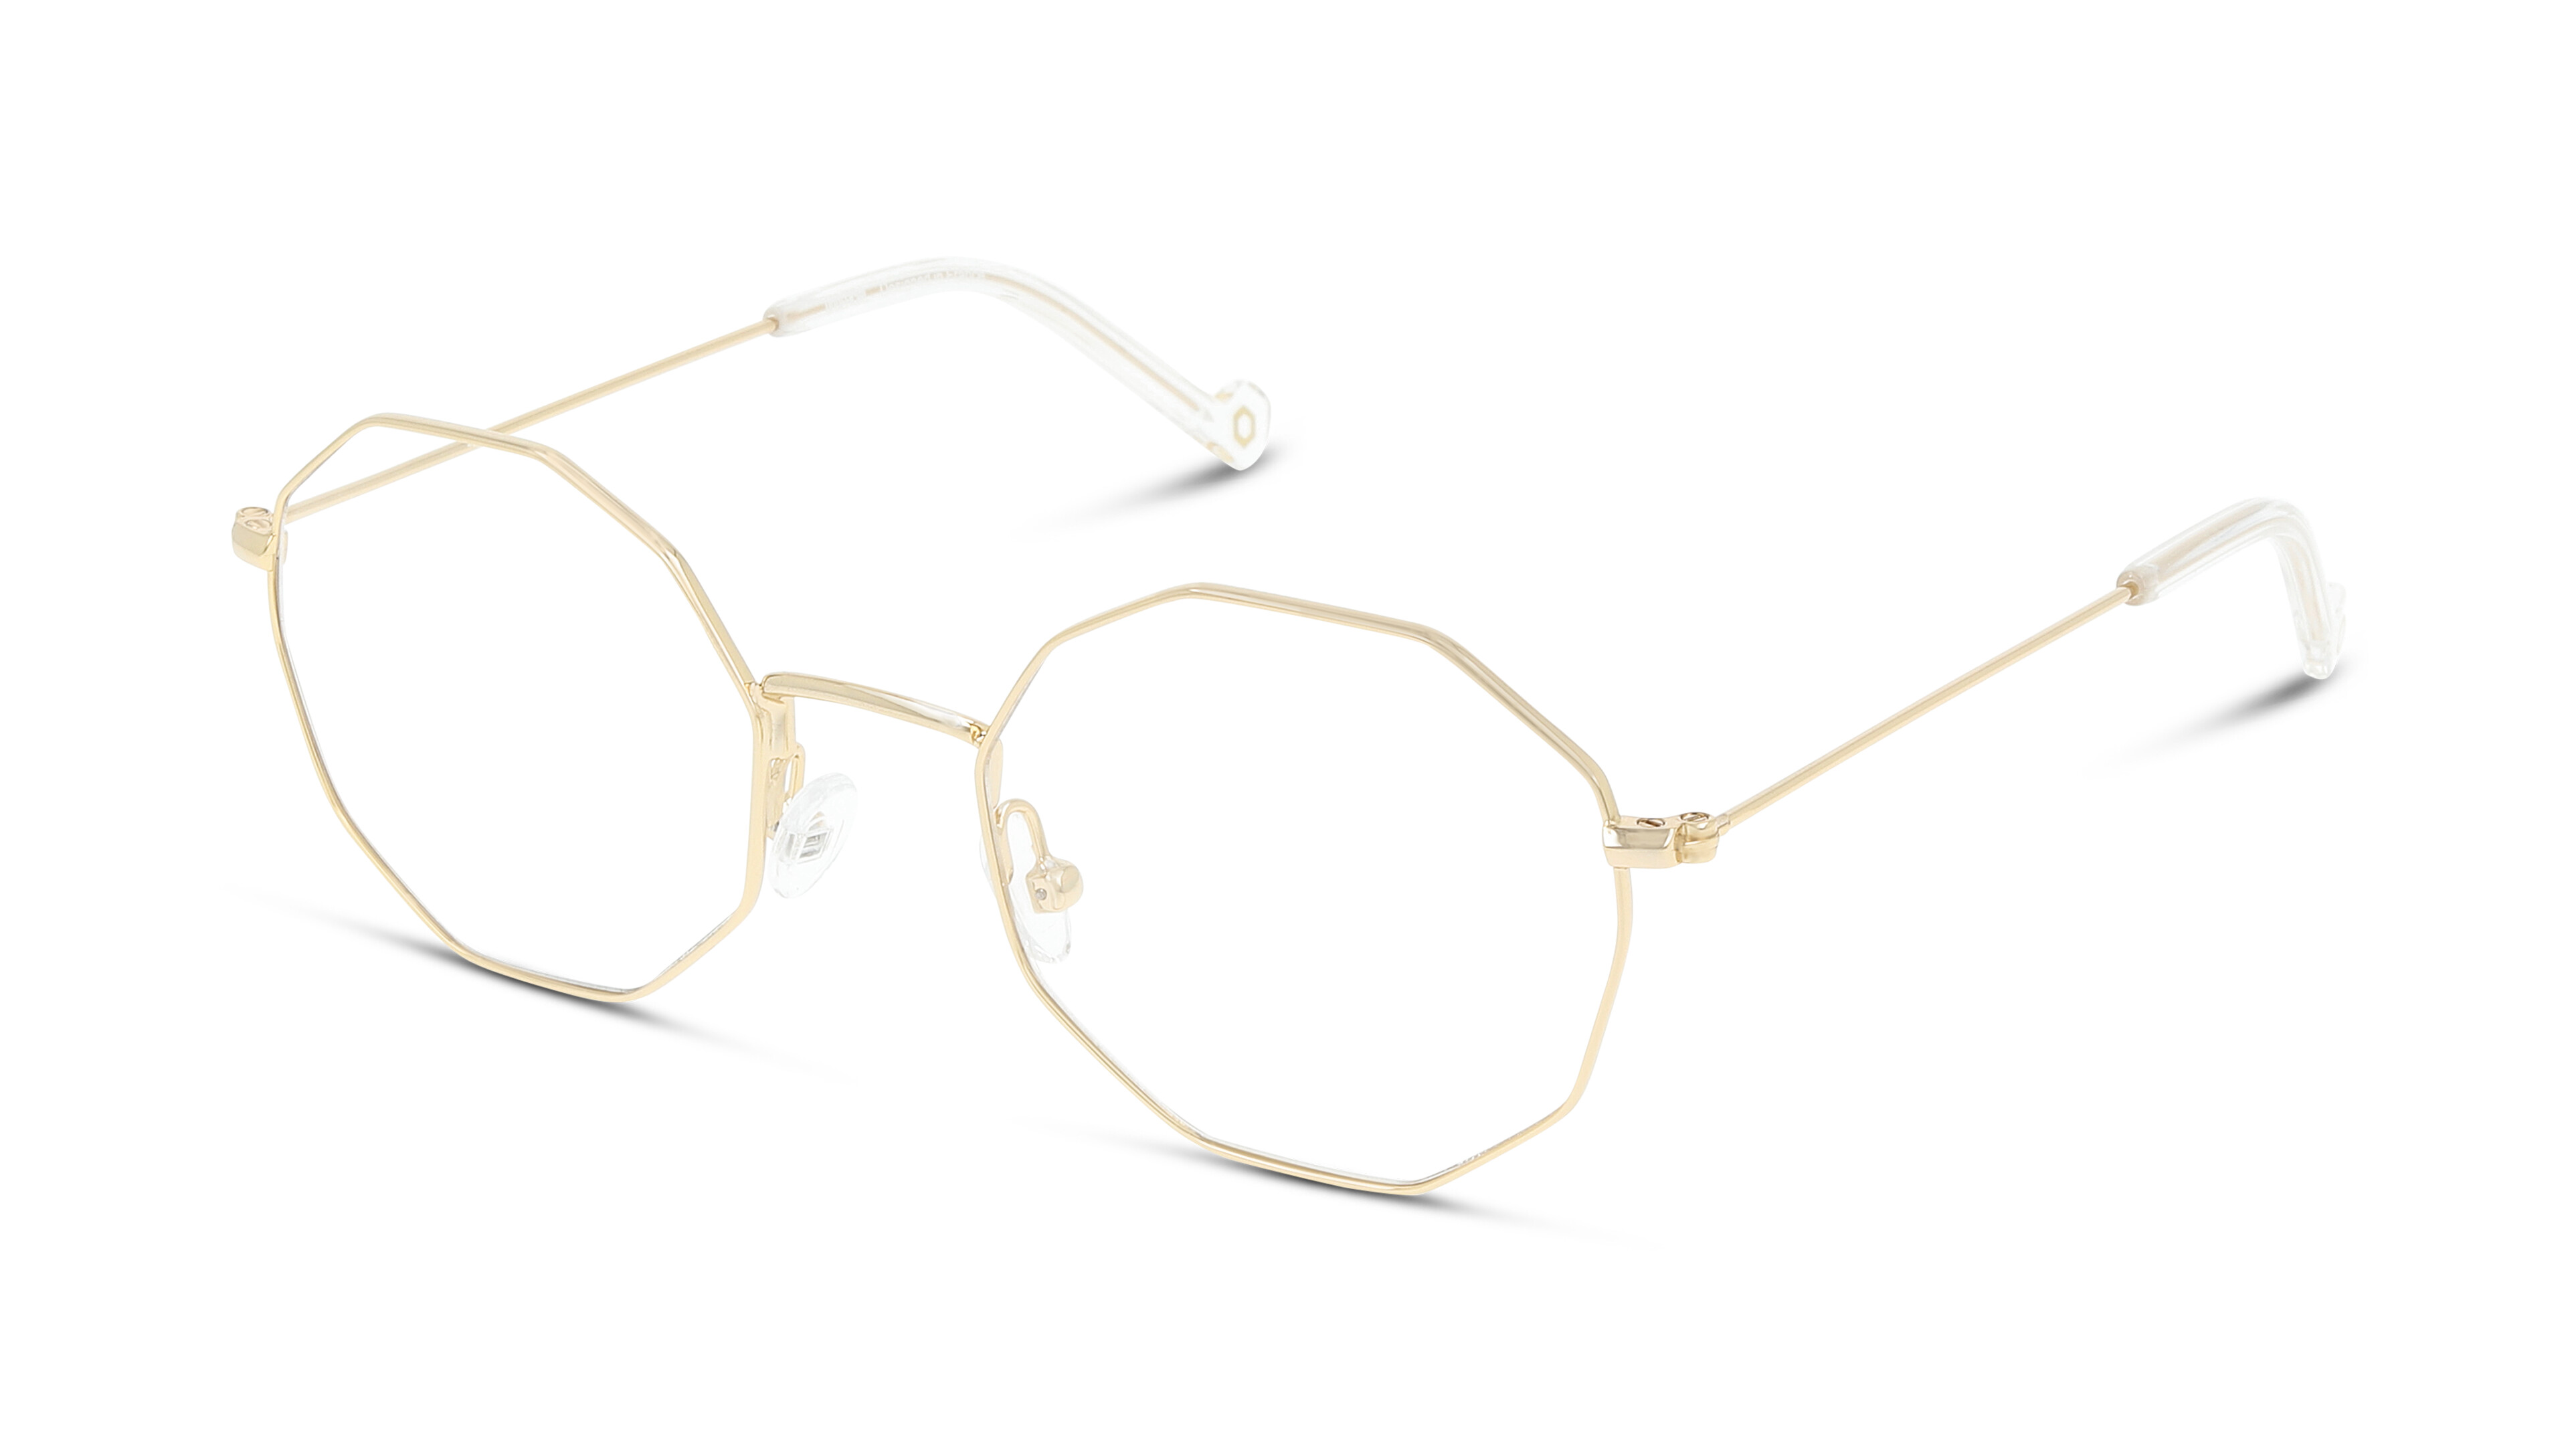 Angle_Left01 UNOFFICIAL UNOF0076 DD00 Brille Goldfarben